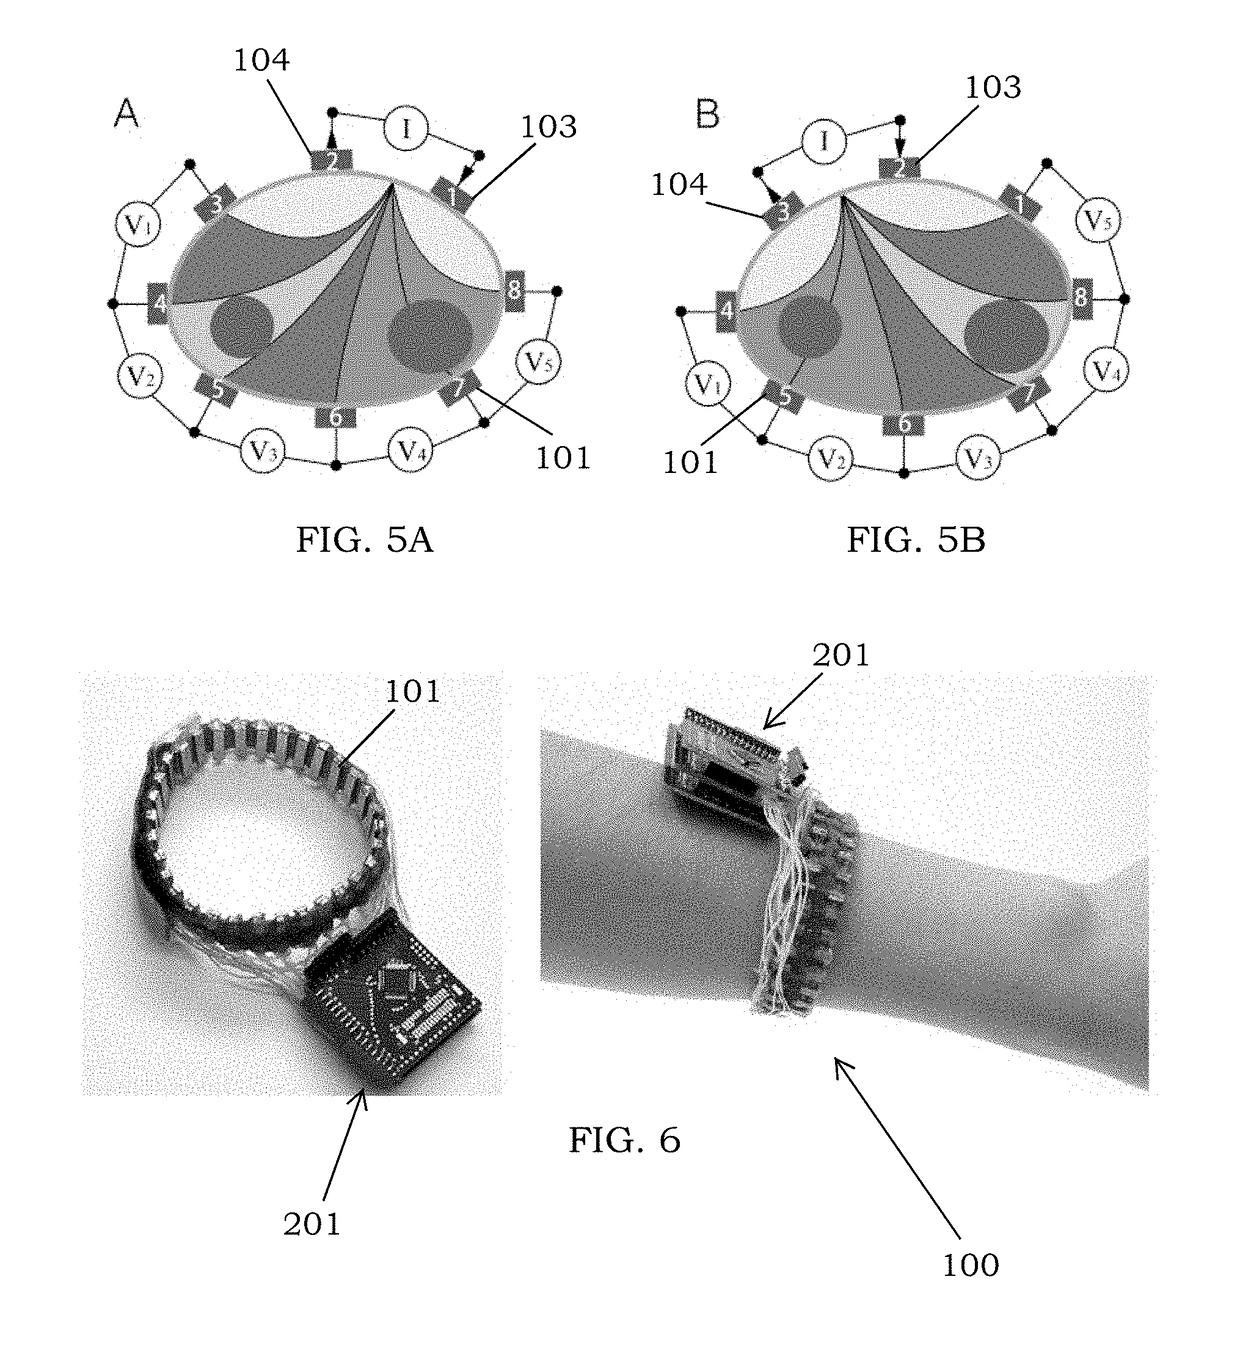 System for Wearable, Low-Cost Electrical Impedance Tomography for Non-Invasive Gesture Recognition